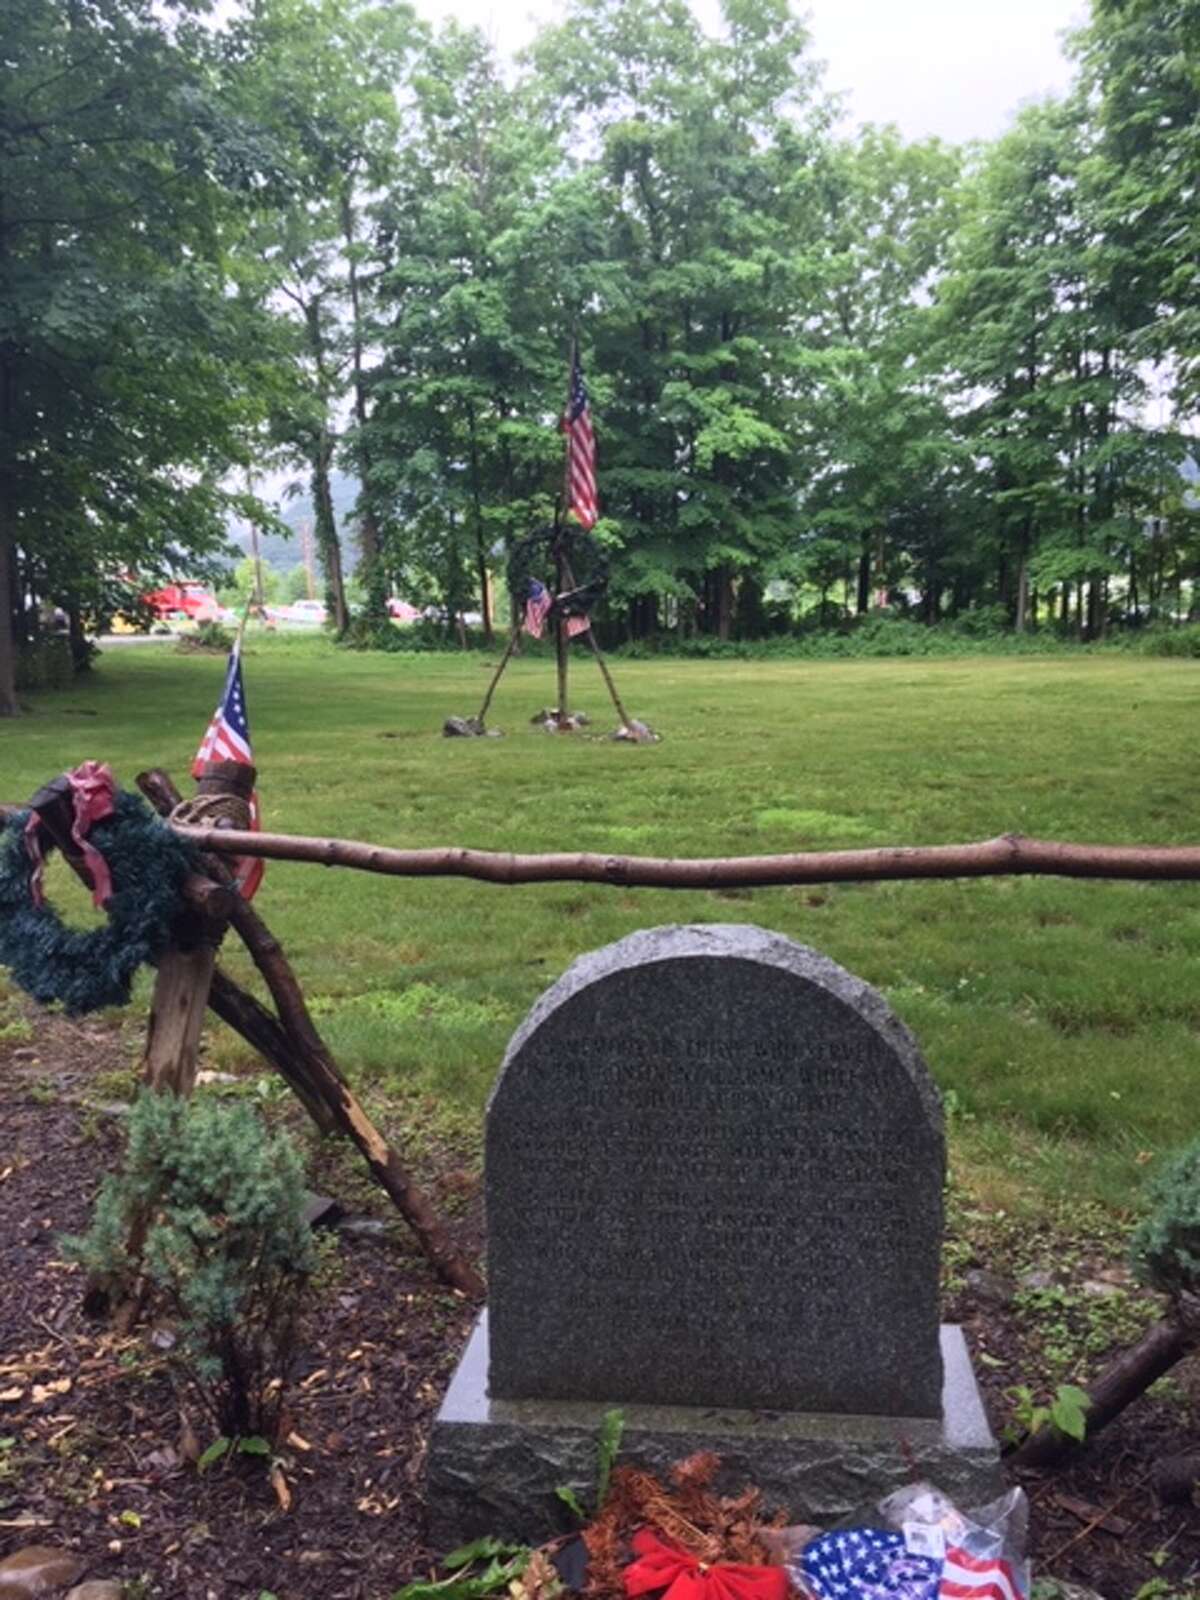 A memorial marker dedicated to the American soldiers who died at the Fishkill Supply Depot during the Revolutionary War. Preservationists seeking to prevent development of the site claim scores if not hundreds of soldiers were buried at this site. The property's owner, developer Domenic Broccoli, disputes that claim. (Photo taken June 22, 2021 in Fishkill, NY.)